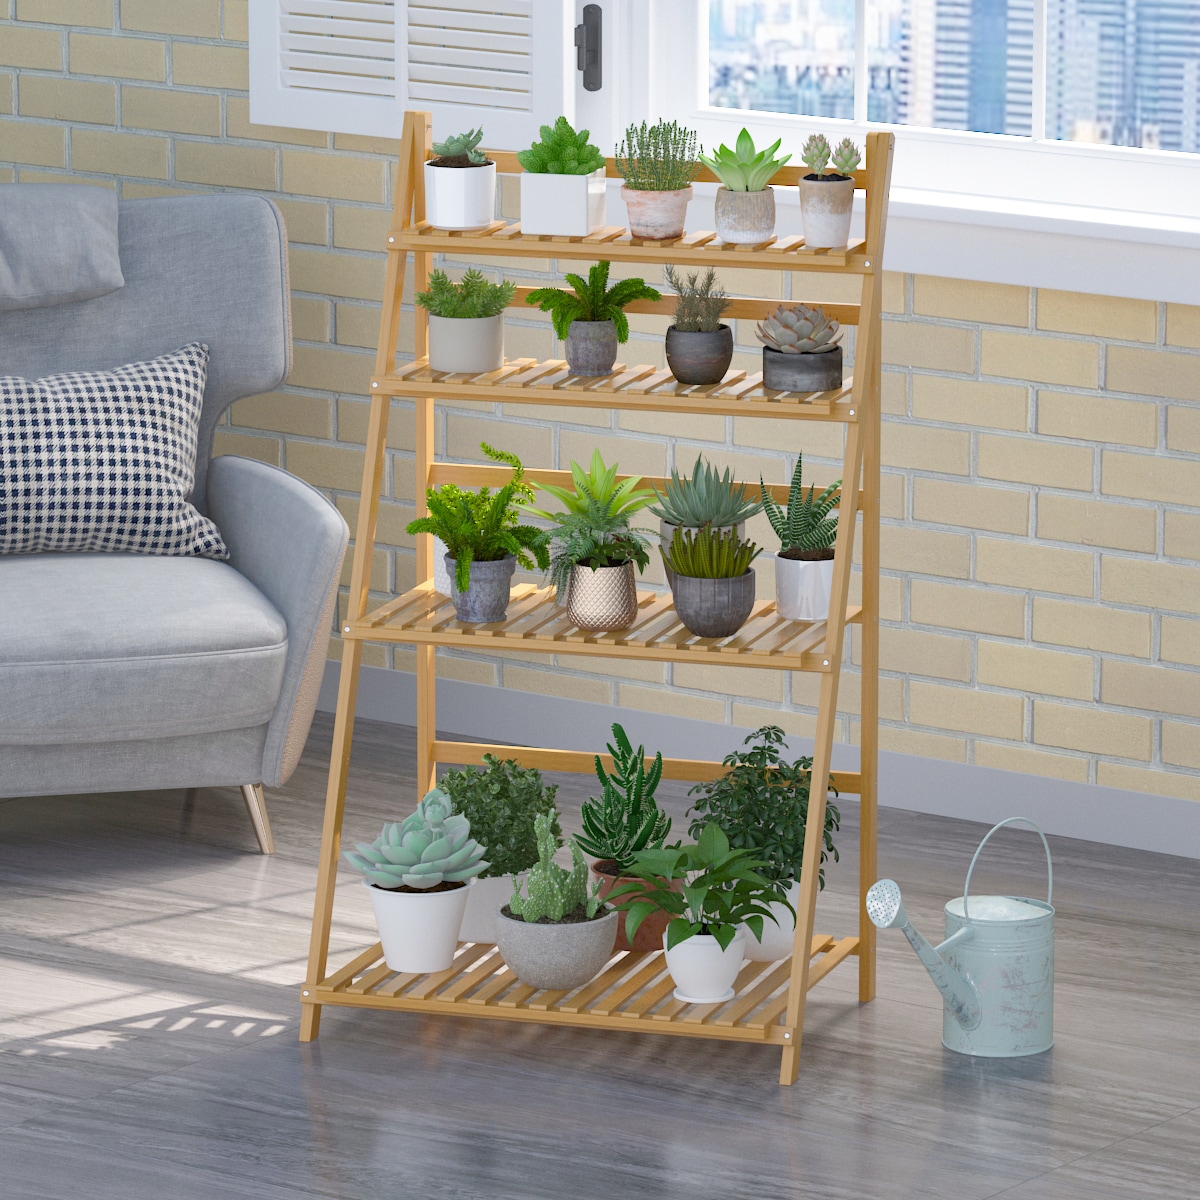 FUFU&GAGA Plant stand 48-in H x 27.6-in W Wood Indoor/Outdoor Rectangular Wood Plant Stand